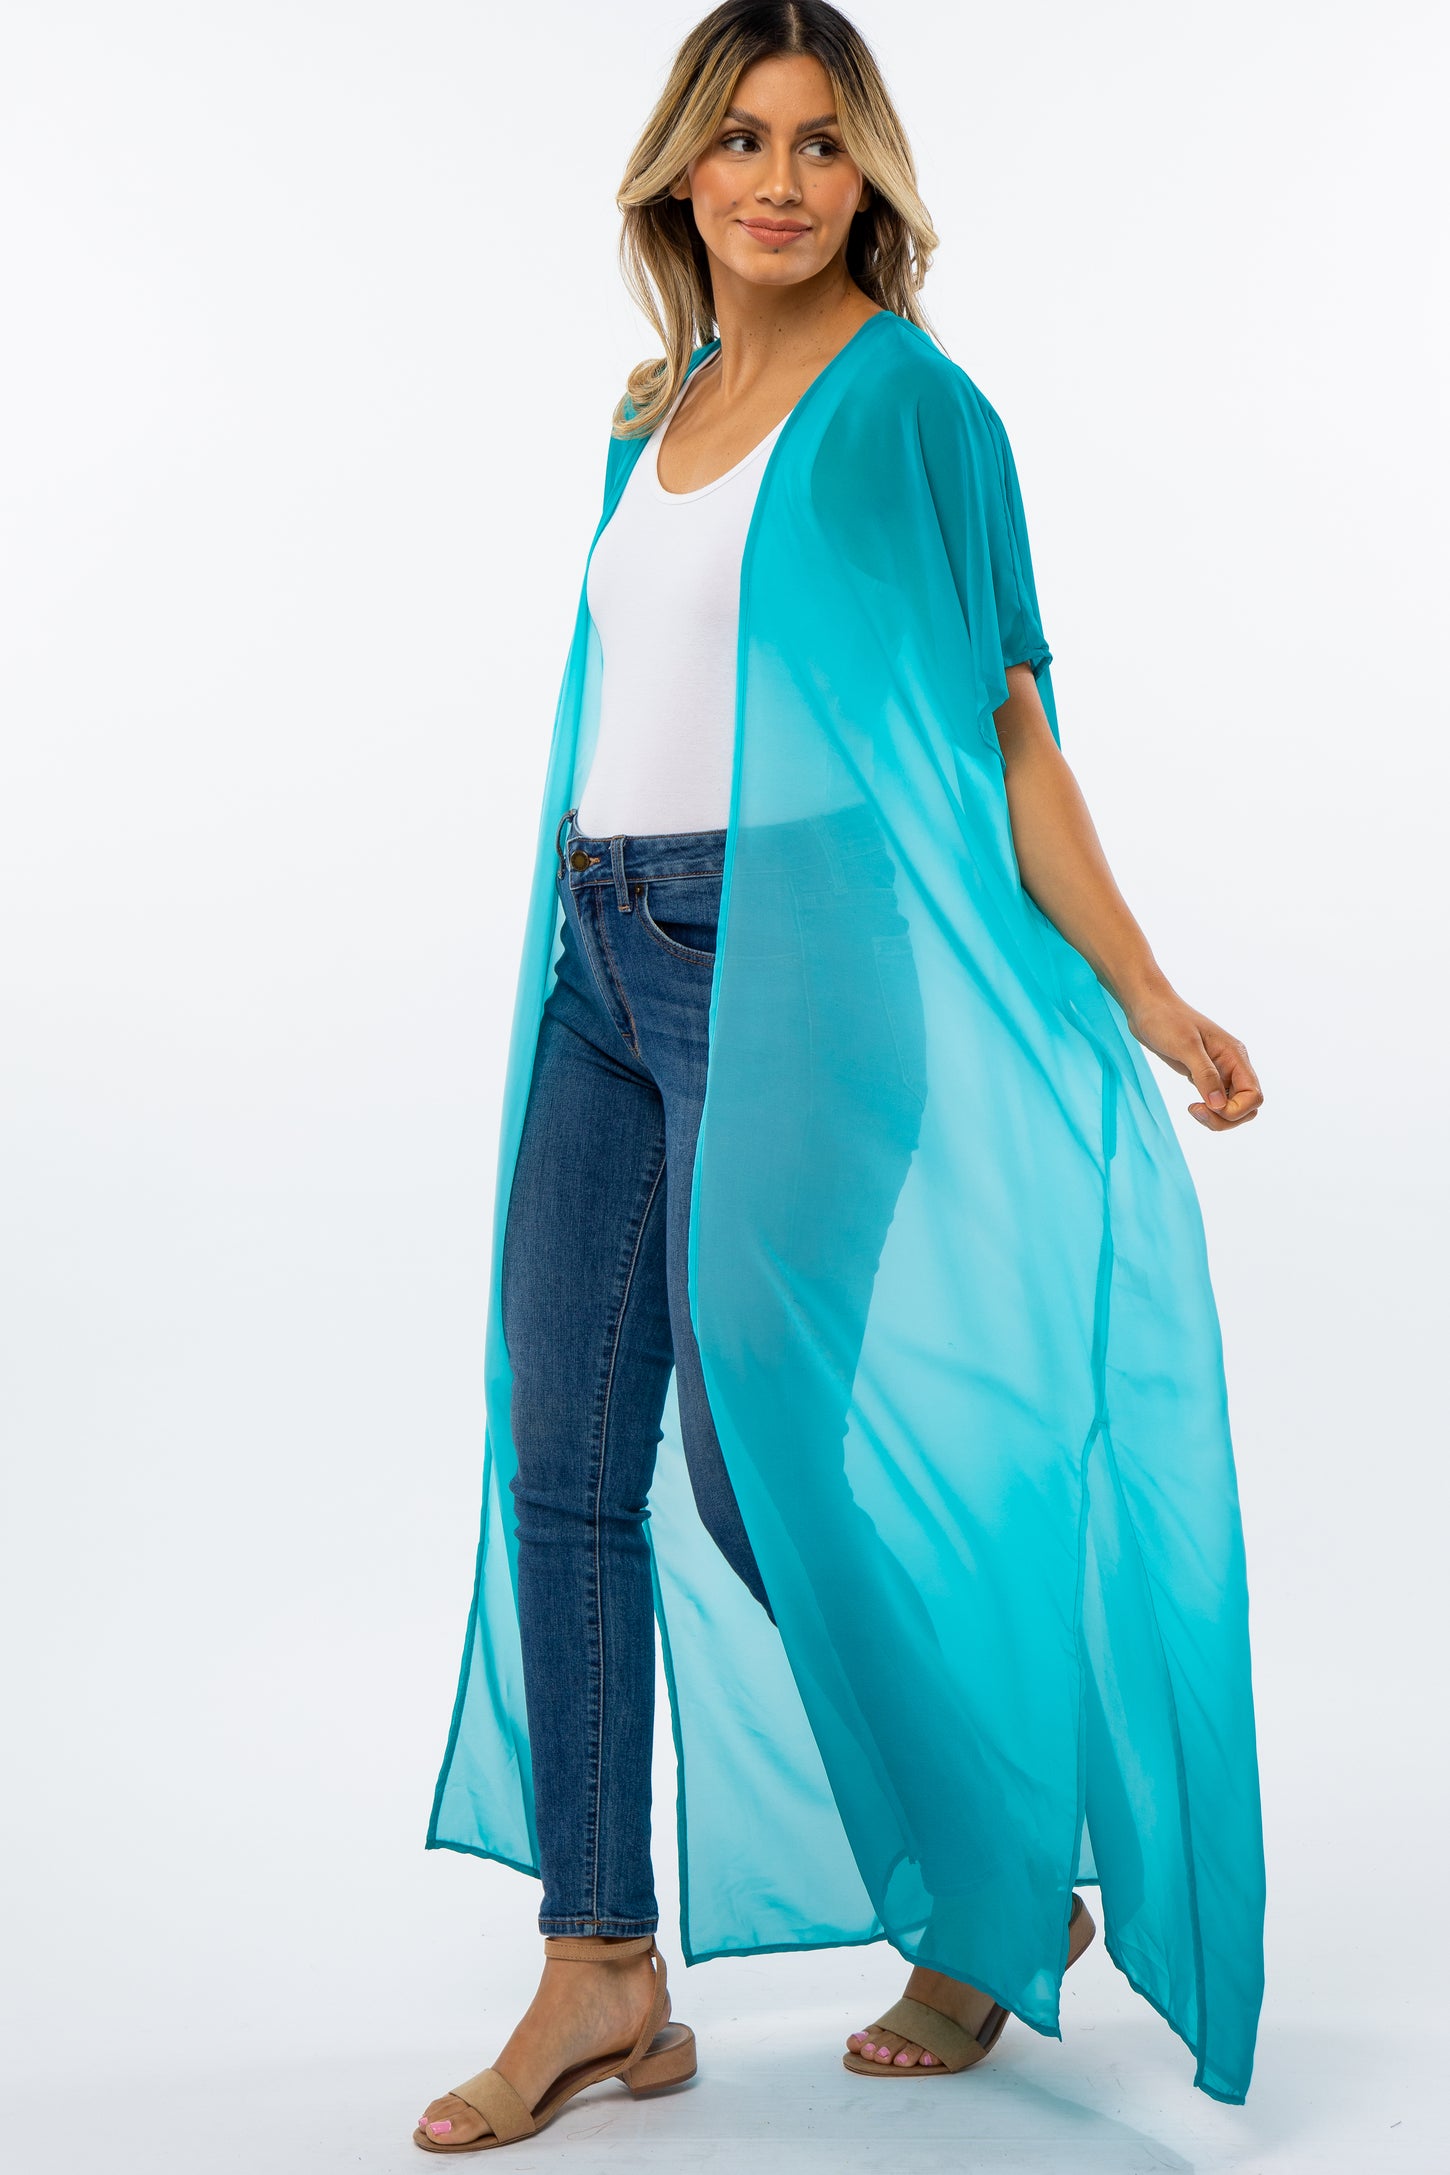 Teal Ombre Chiffon Long Cover Up